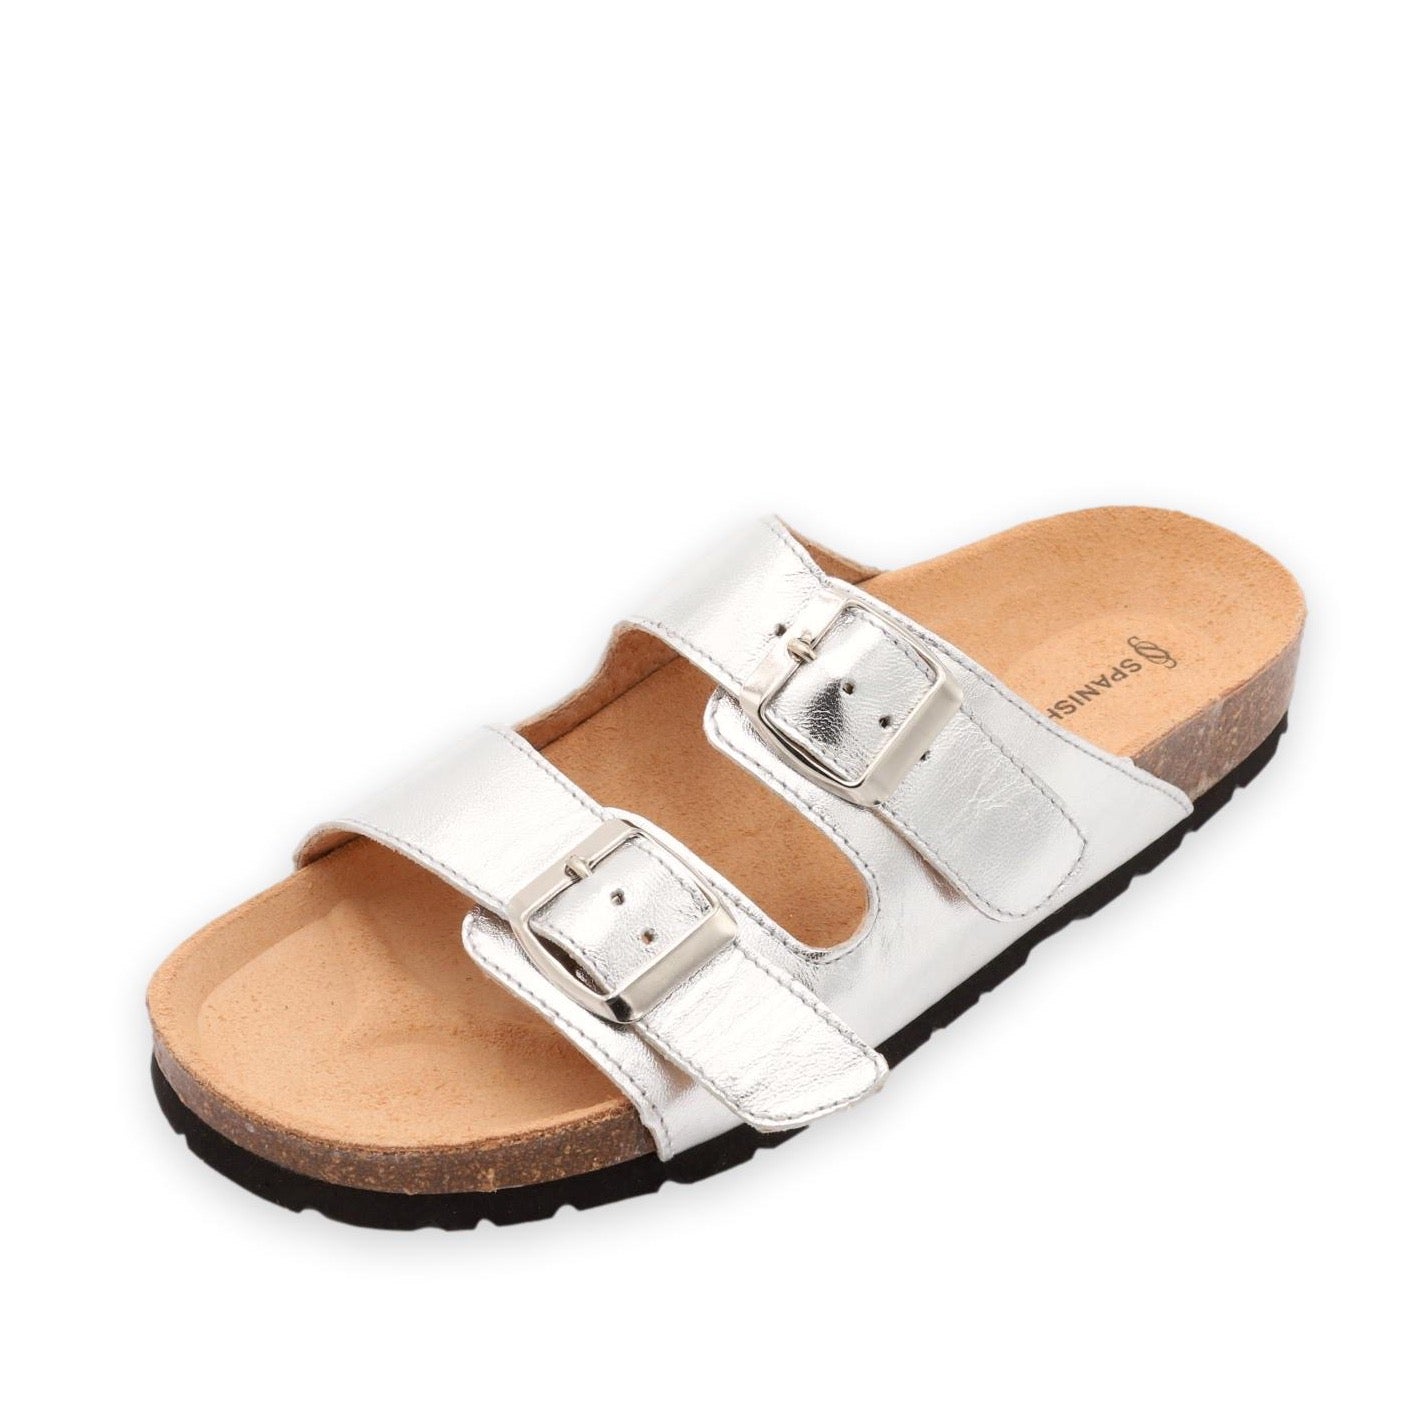 Nordic Silver sandals